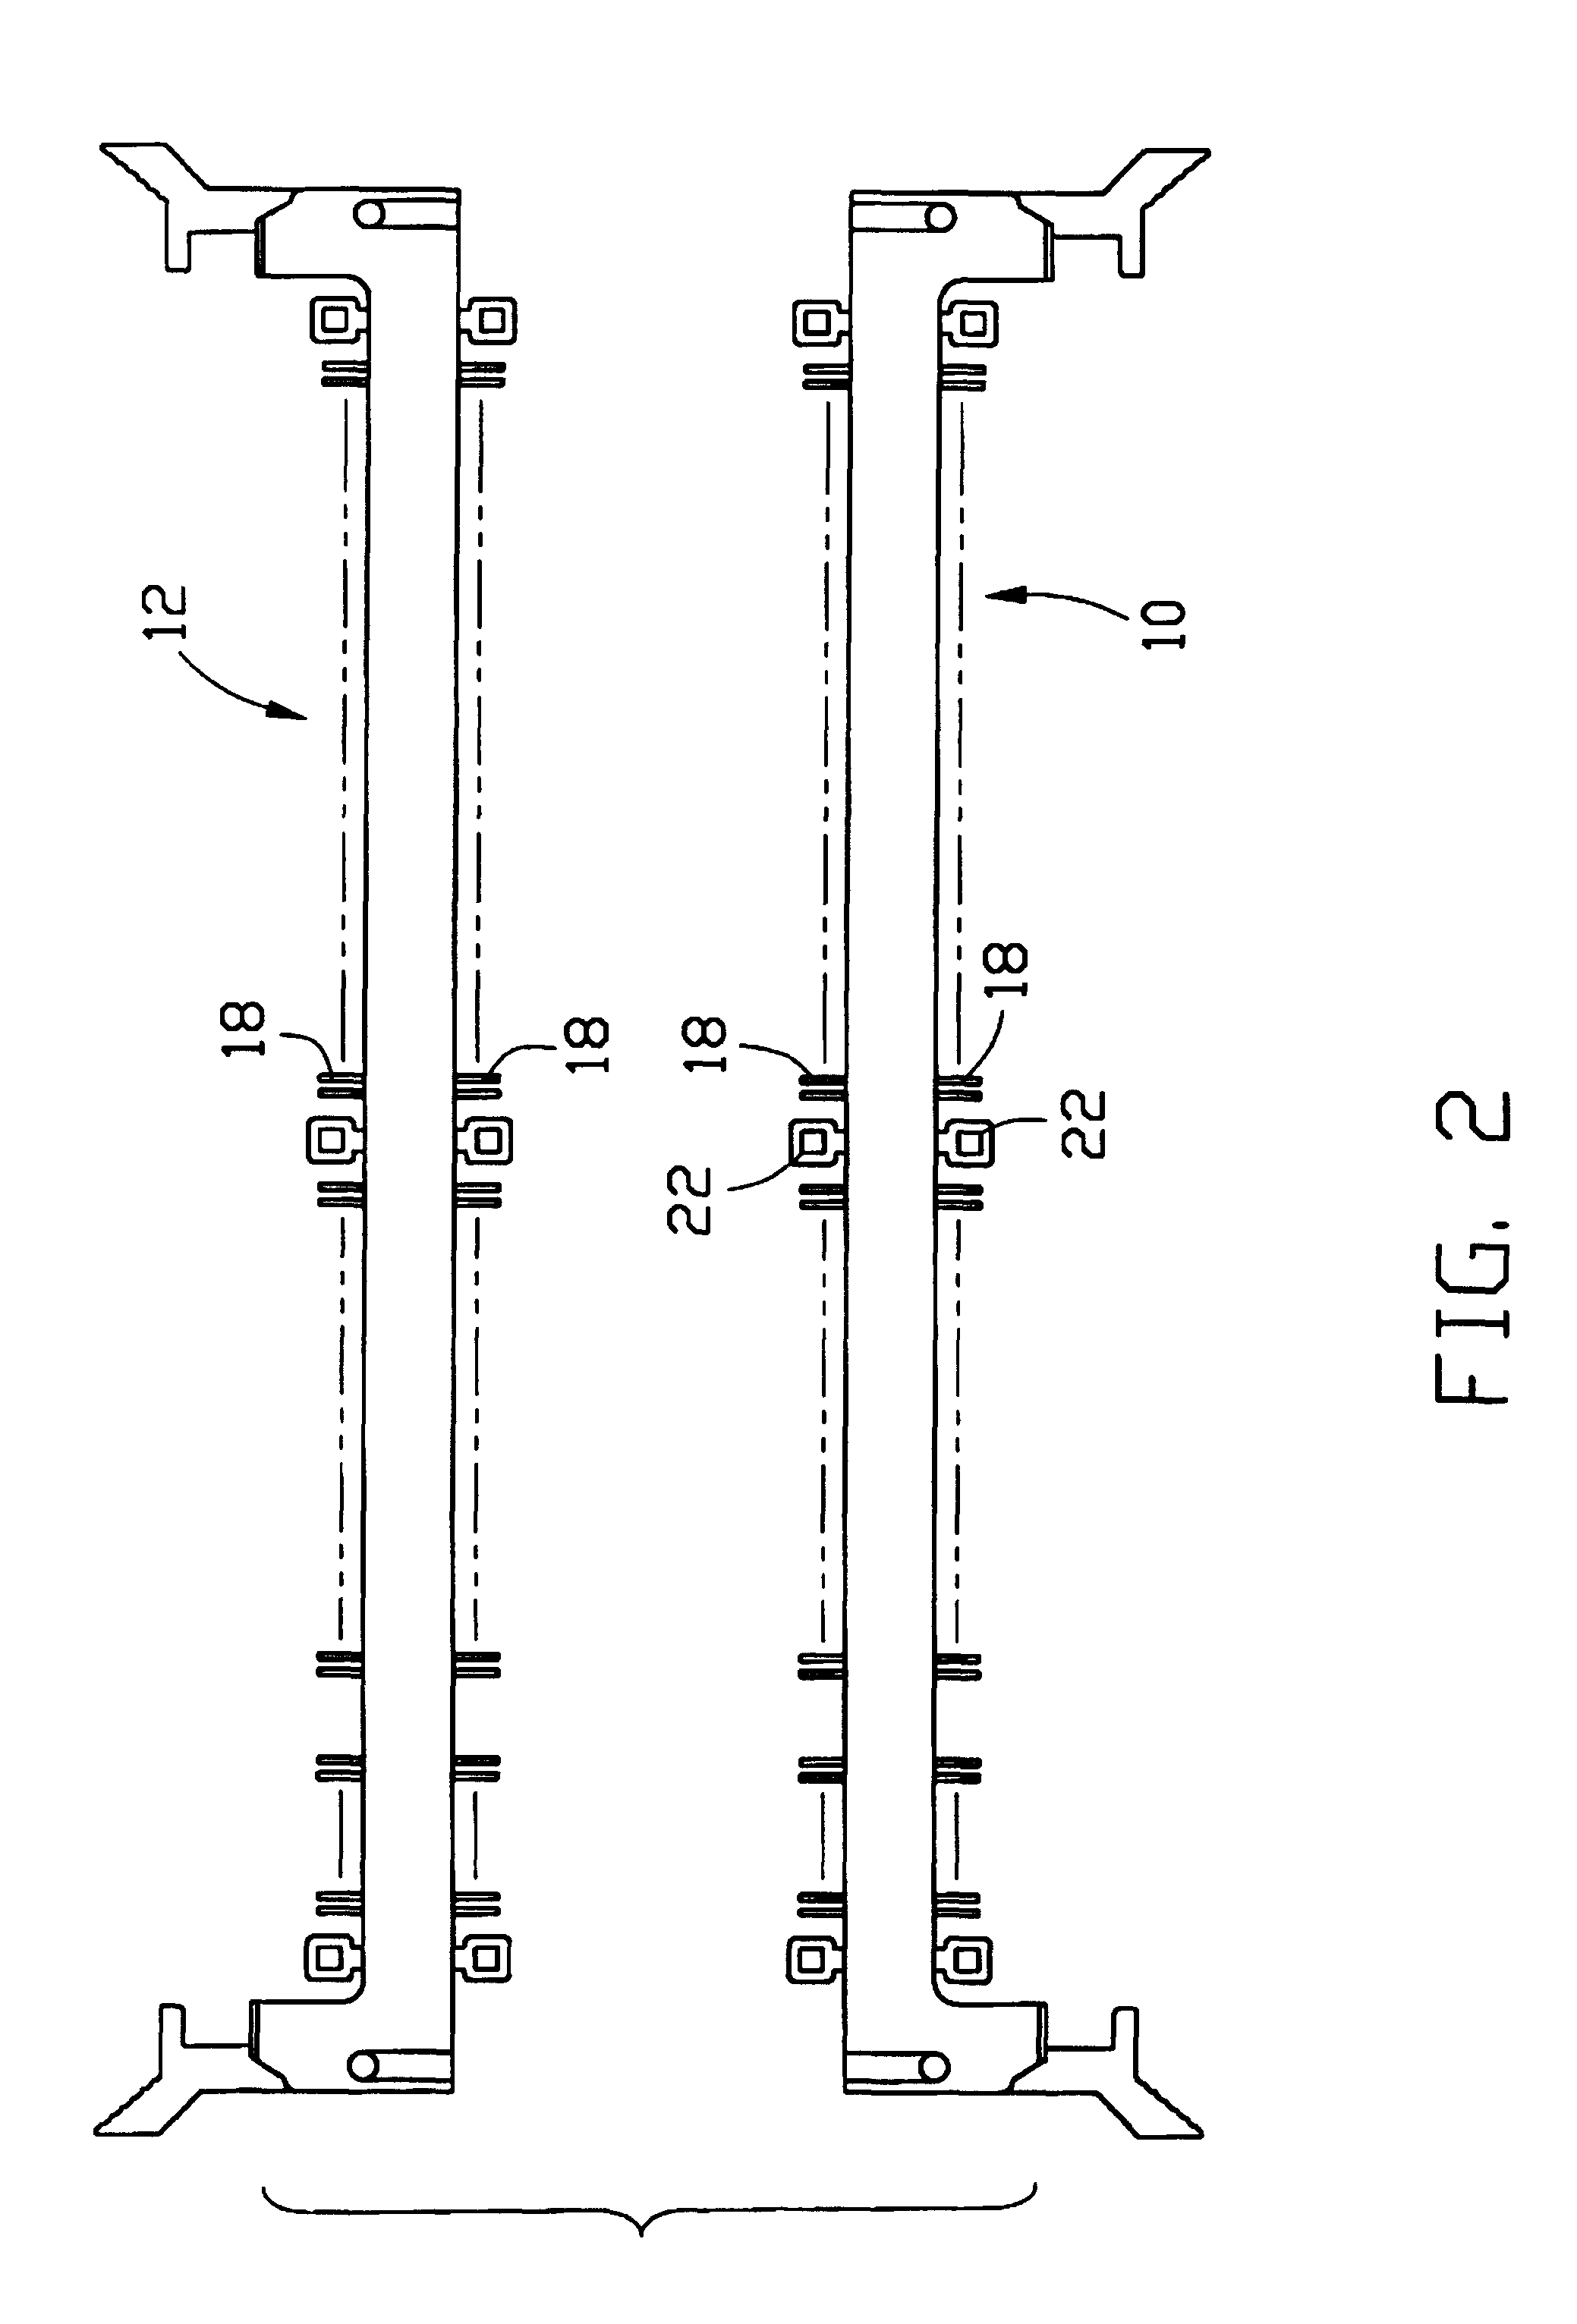 Card edge connector assembly with ejectors for linear installation/ejection and the associated printed circuit board for use therewith